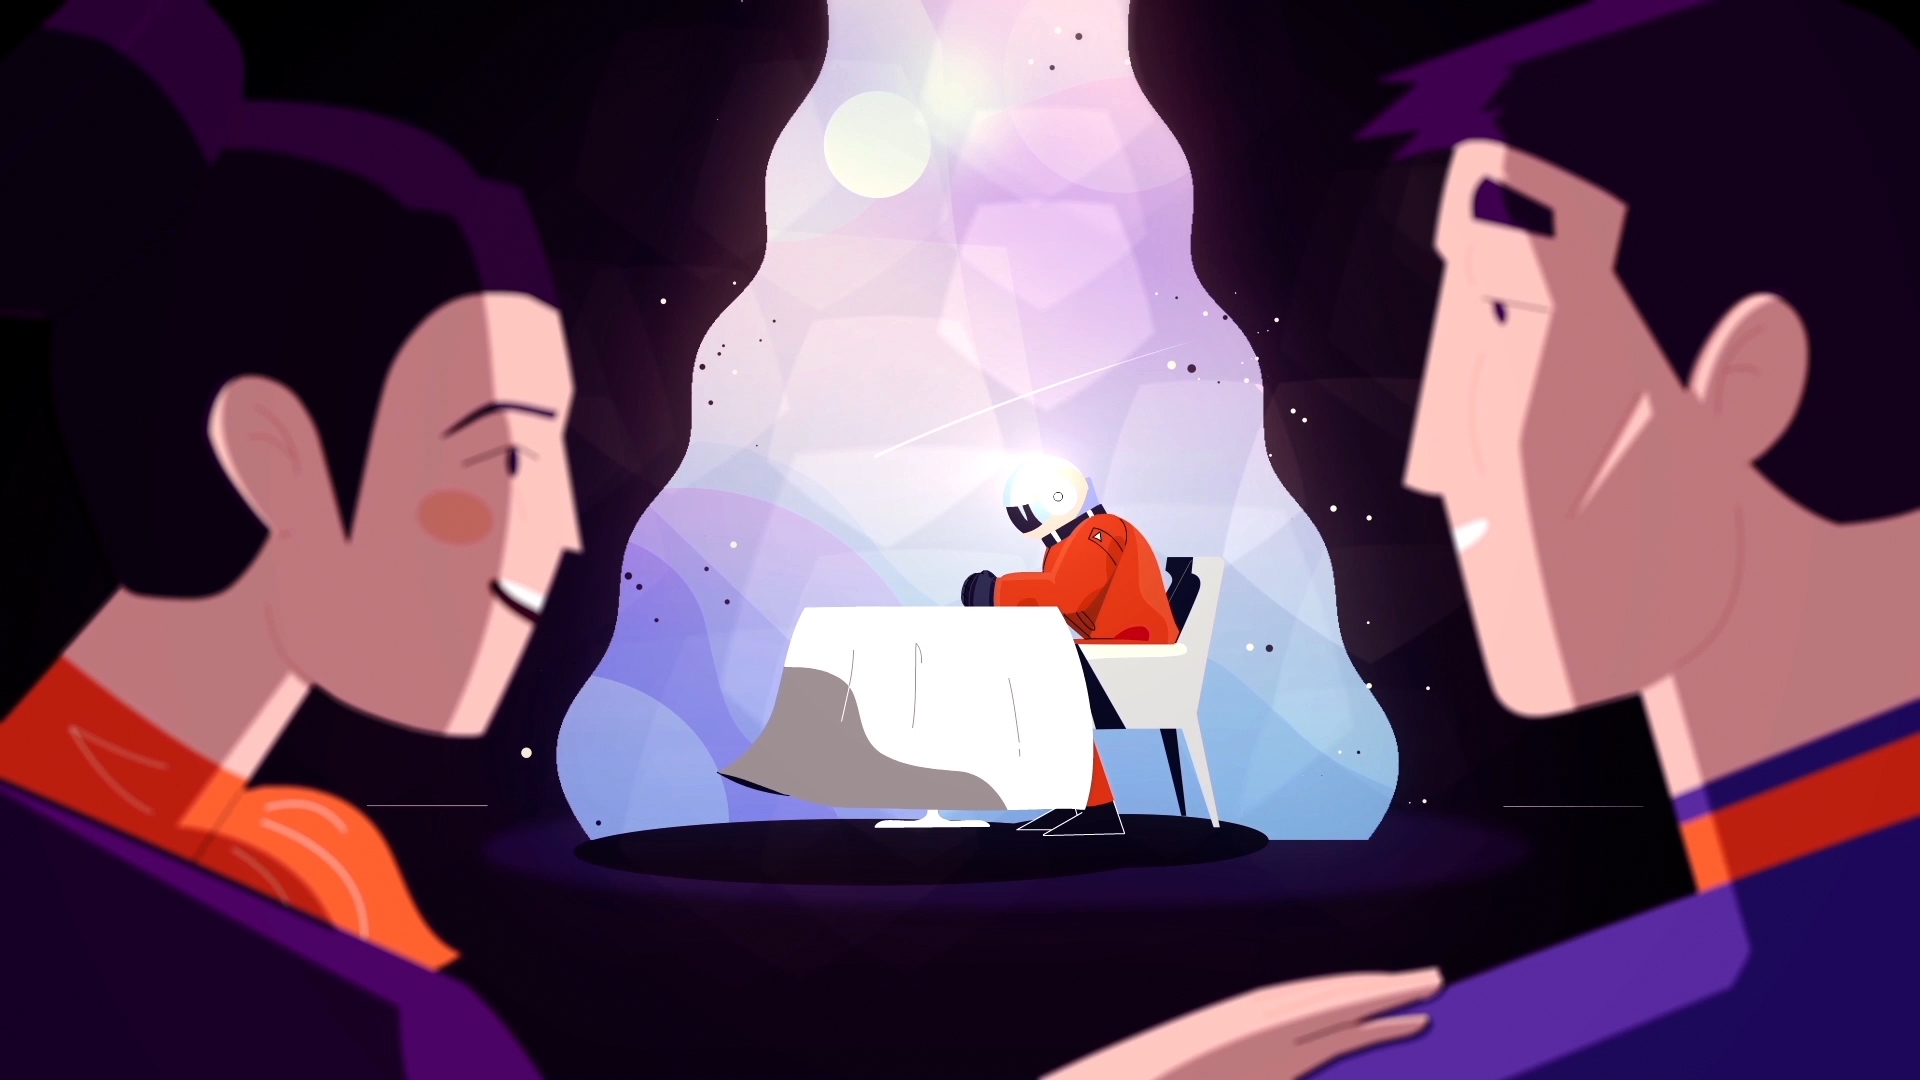 Final Frontier and Le Cube's Animated Short for Ritz-Carlton, China Takes Us to The Stars